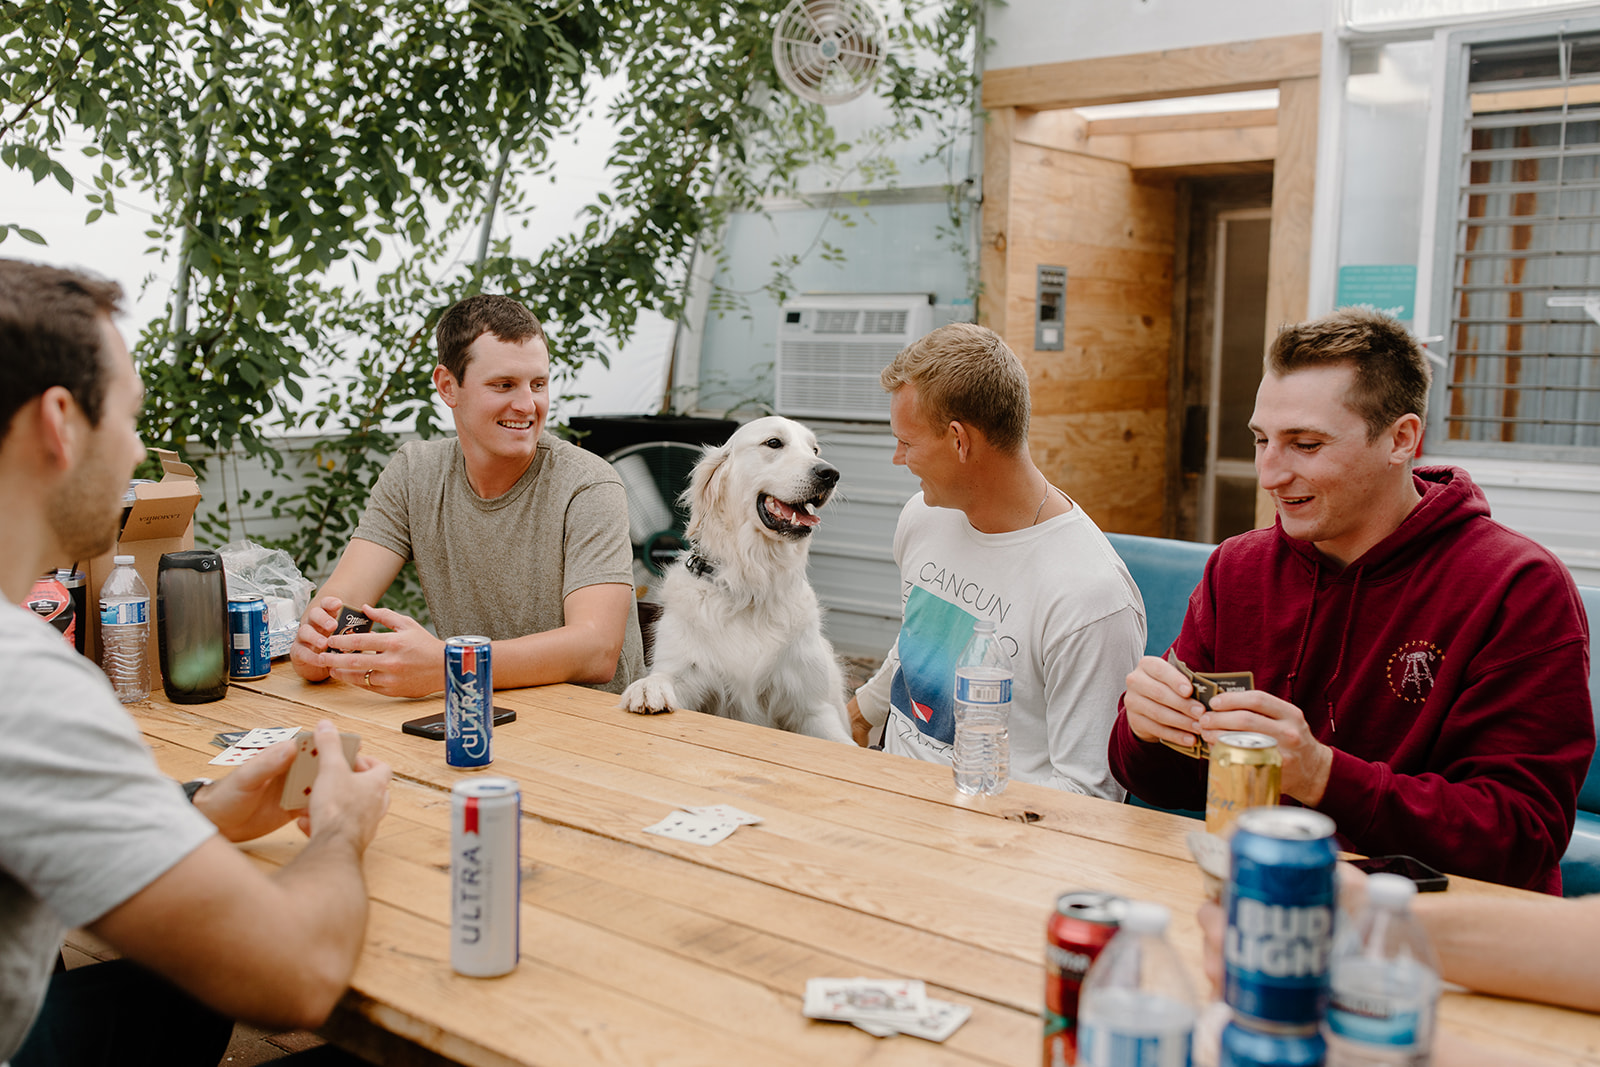 Groom hangs out with his friends and dog while playing cards